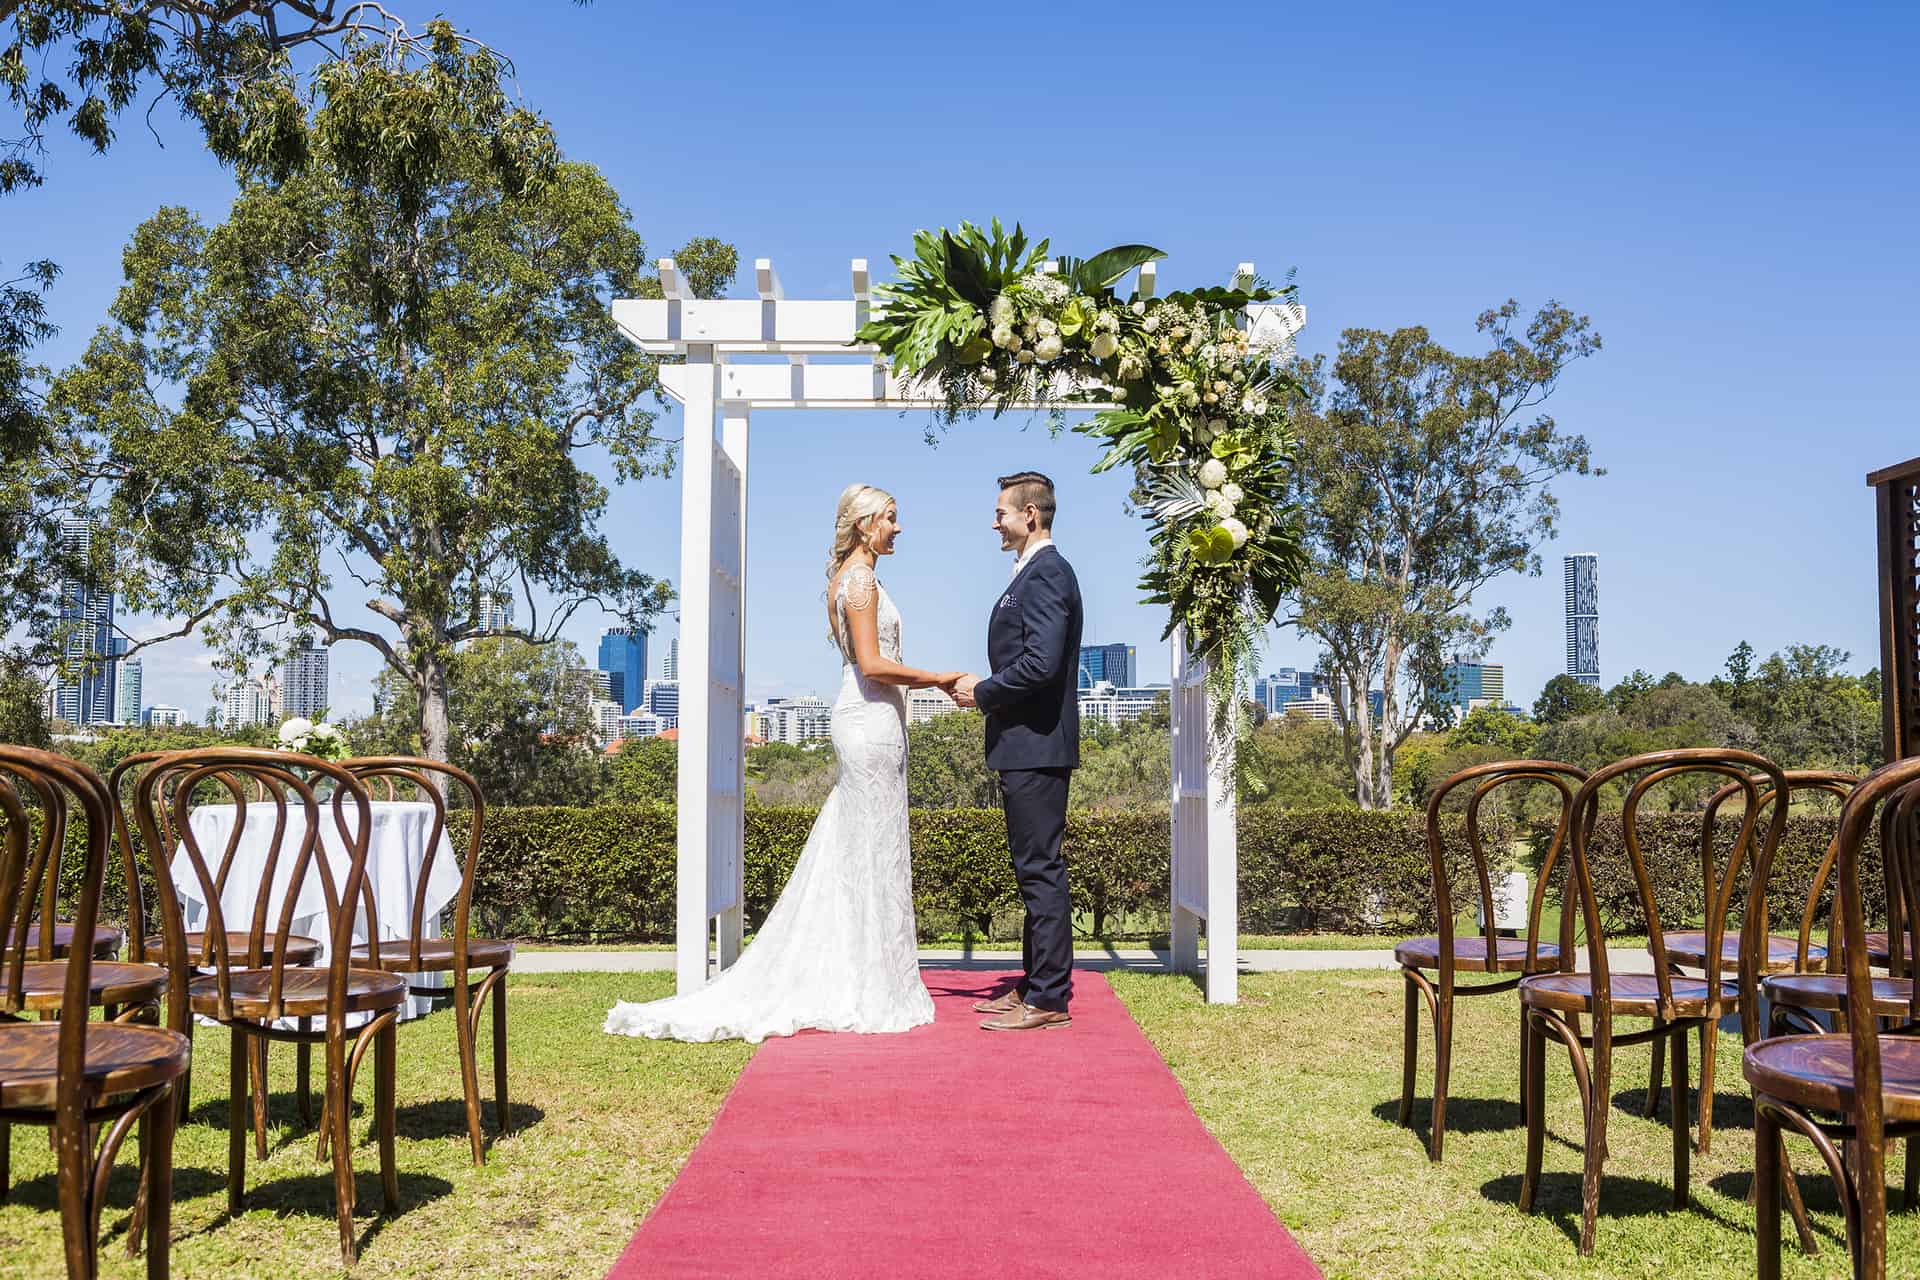 The Newest Brisbane Wedding Ceremony Space With Spectacular Views!